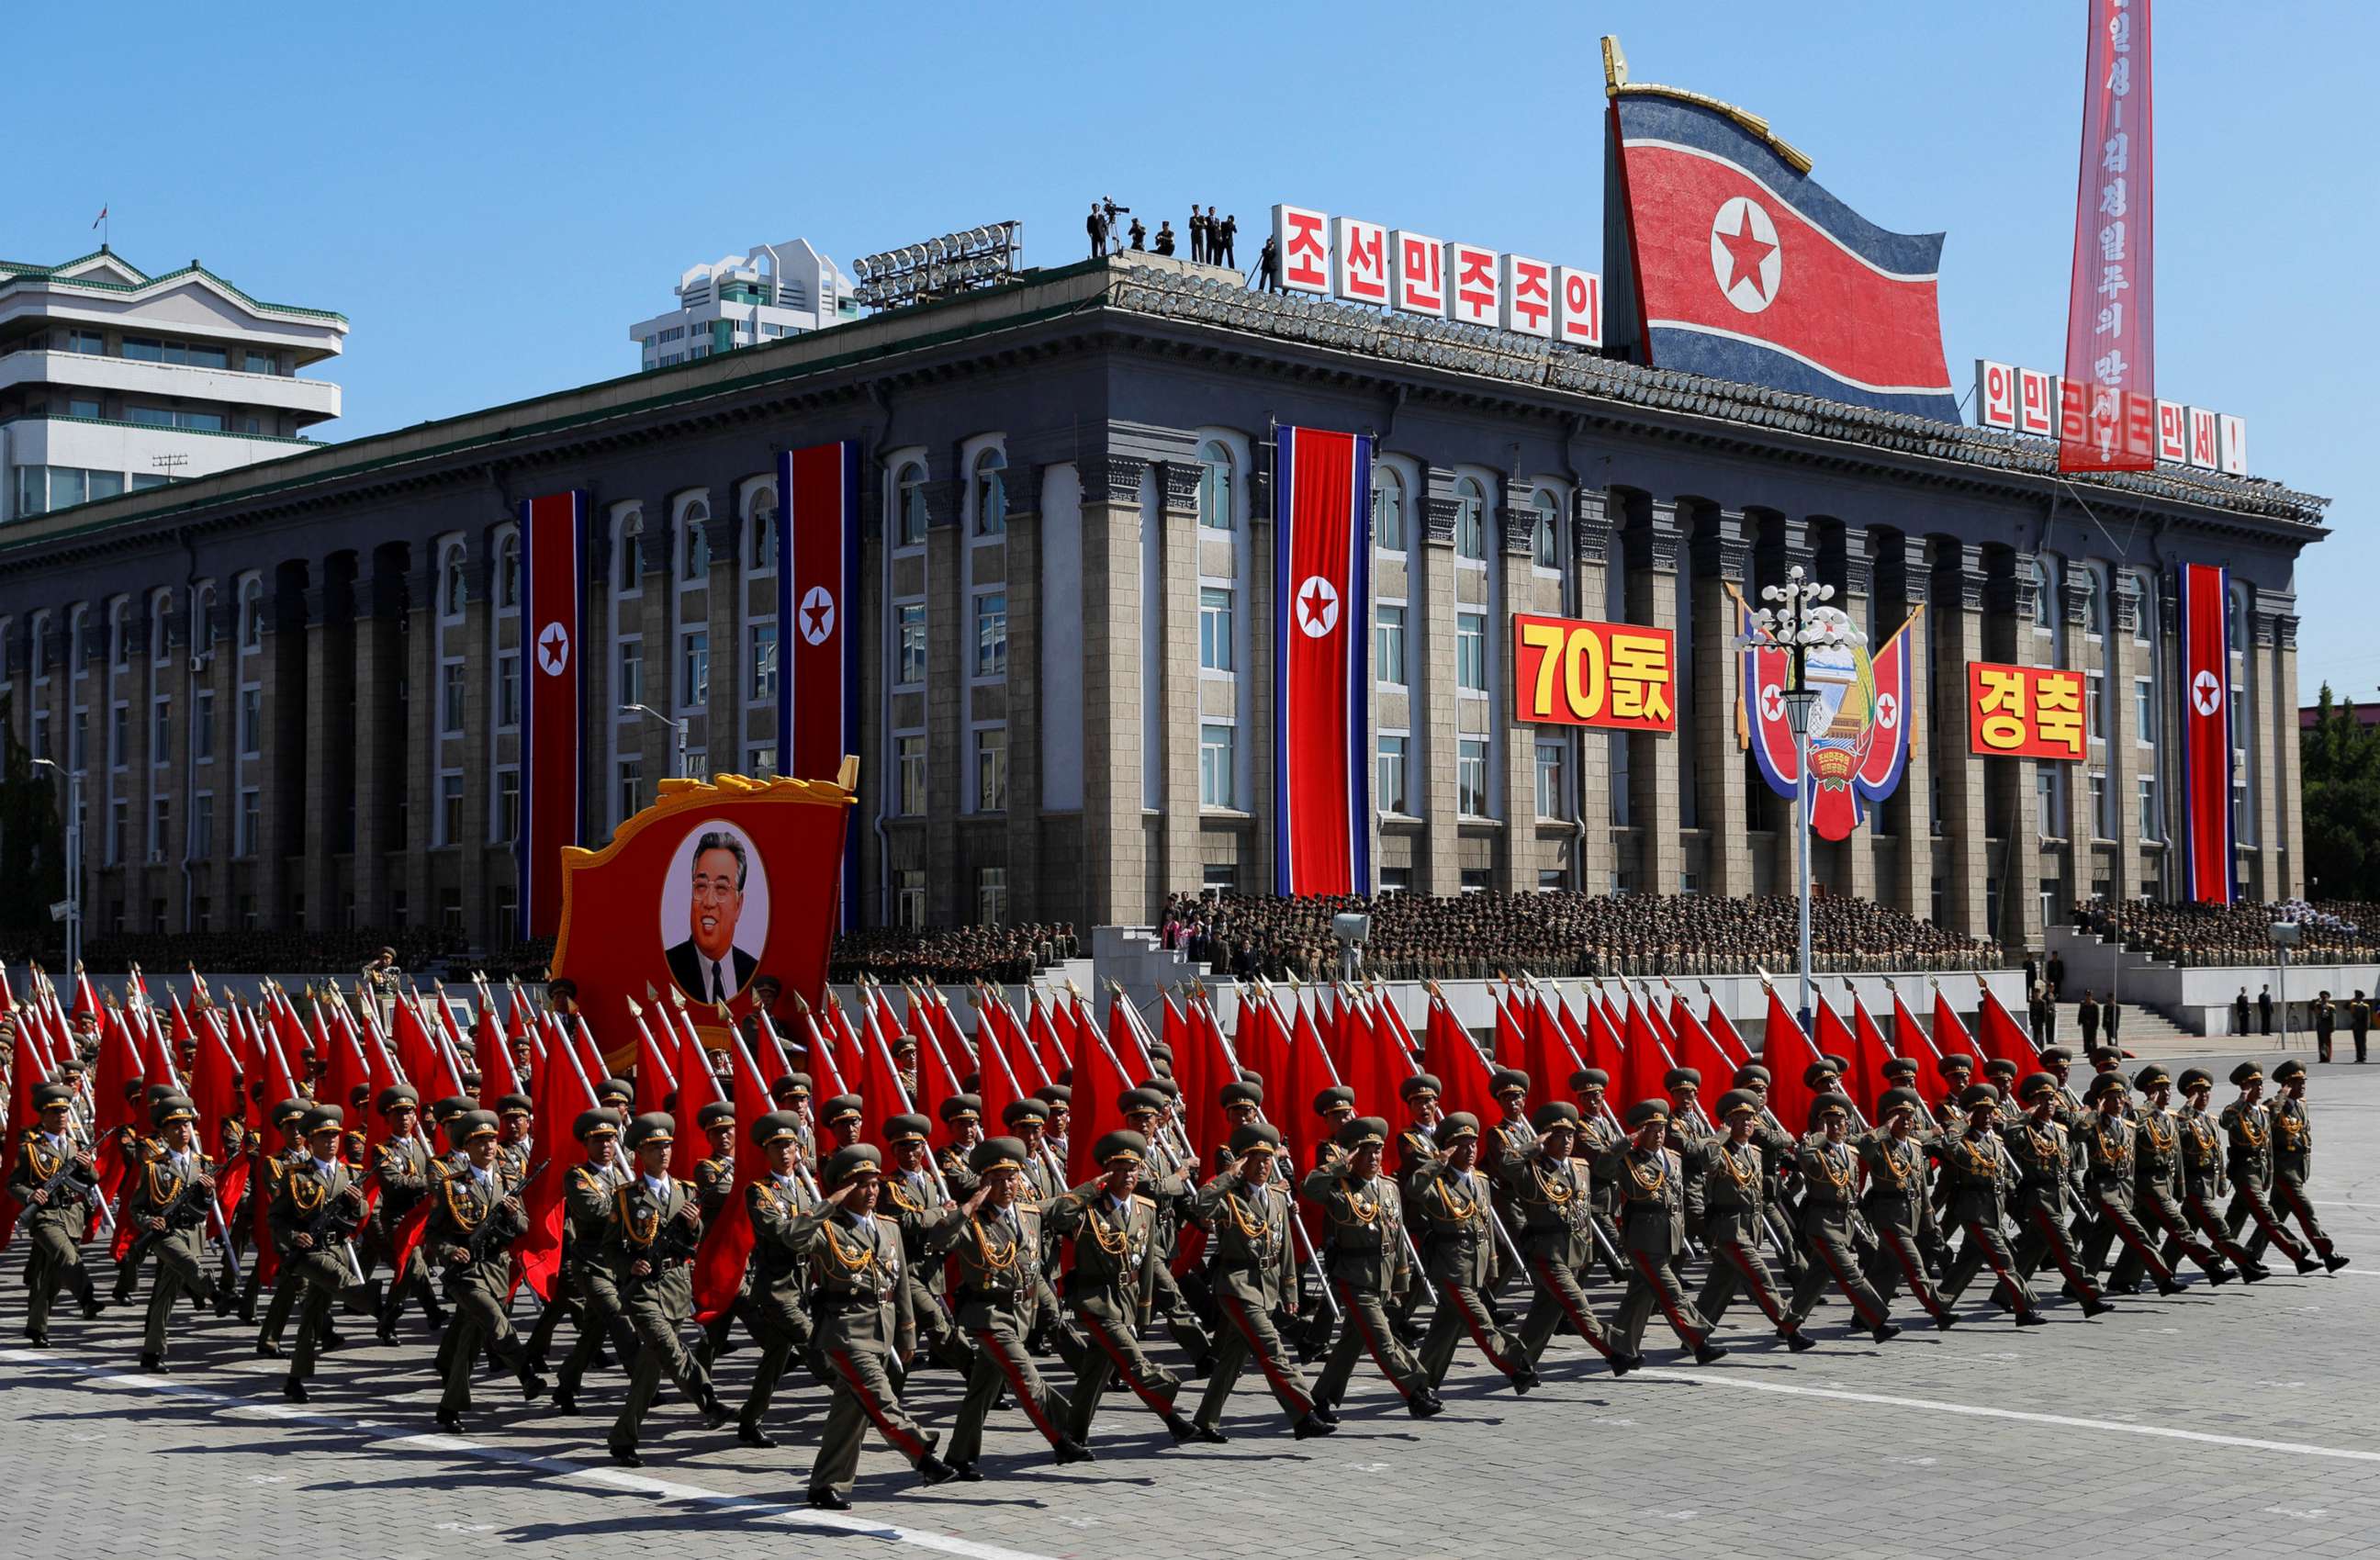 PHOTO: Soldiers march with the portrait of North Korean founder Kim Il Sung during a military parade marking the 70th anniversary of country's foundation in Pyongyang, North Korea, Sept. 9, 2018.